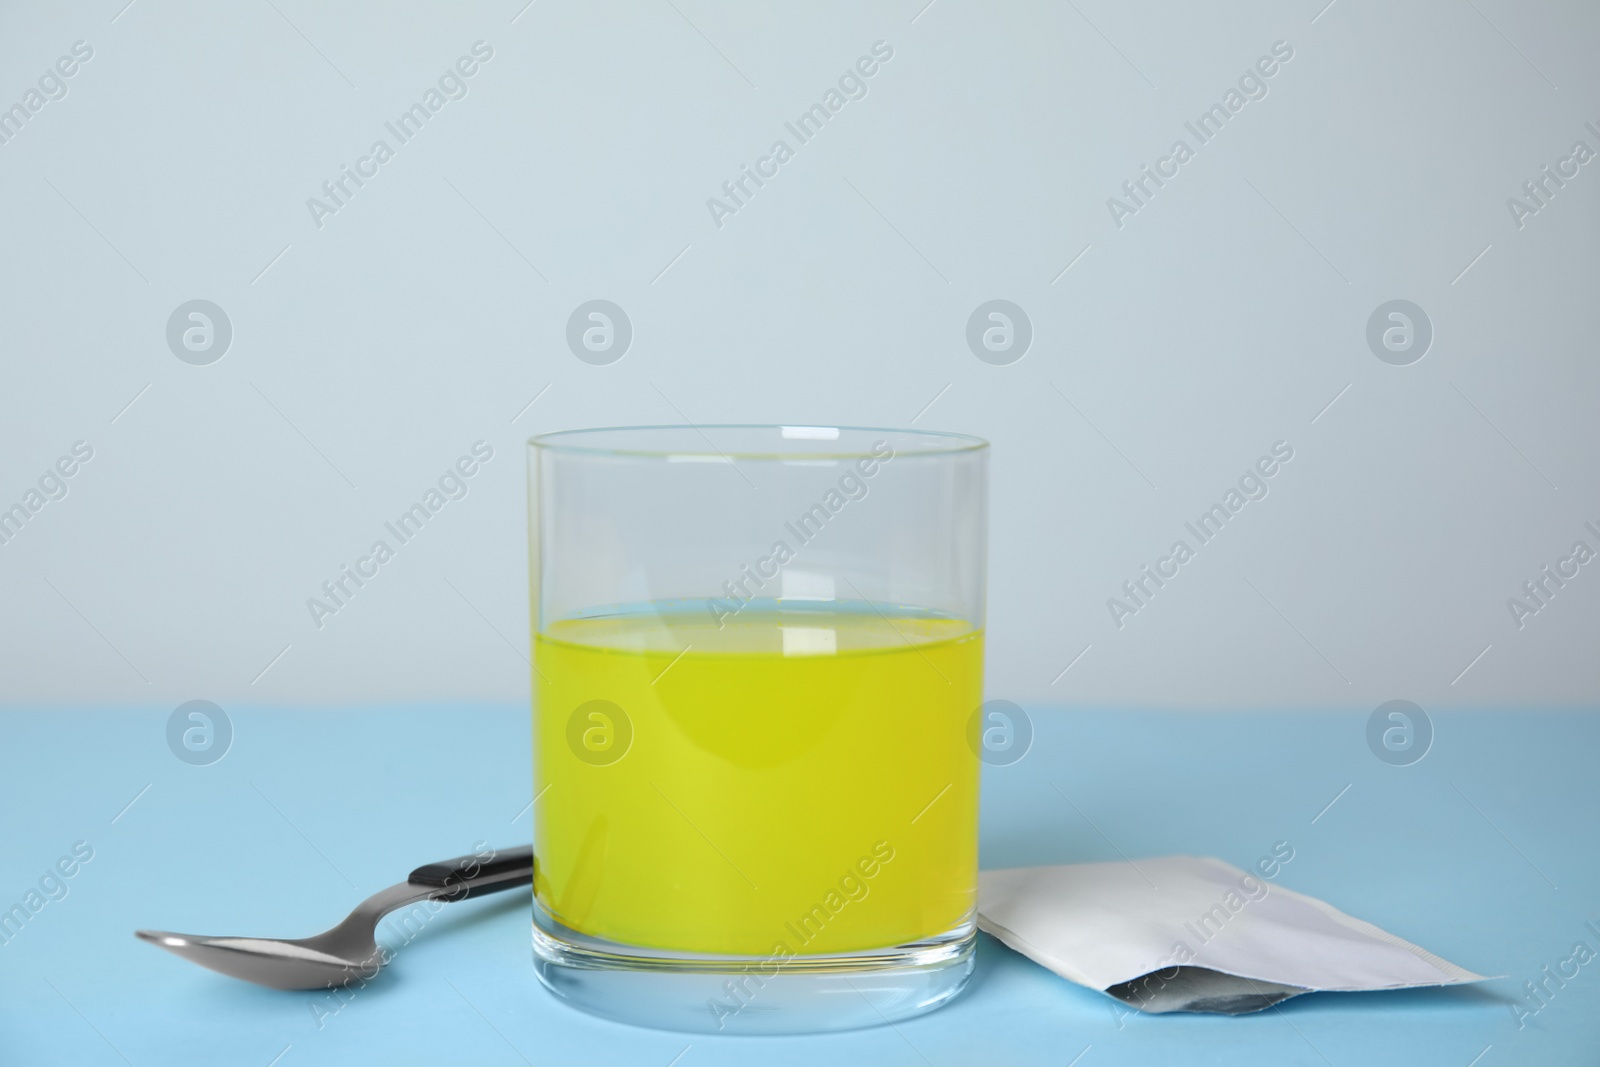 Photo of Glass of dissolved medicine, sachet and spoon on turquoise table